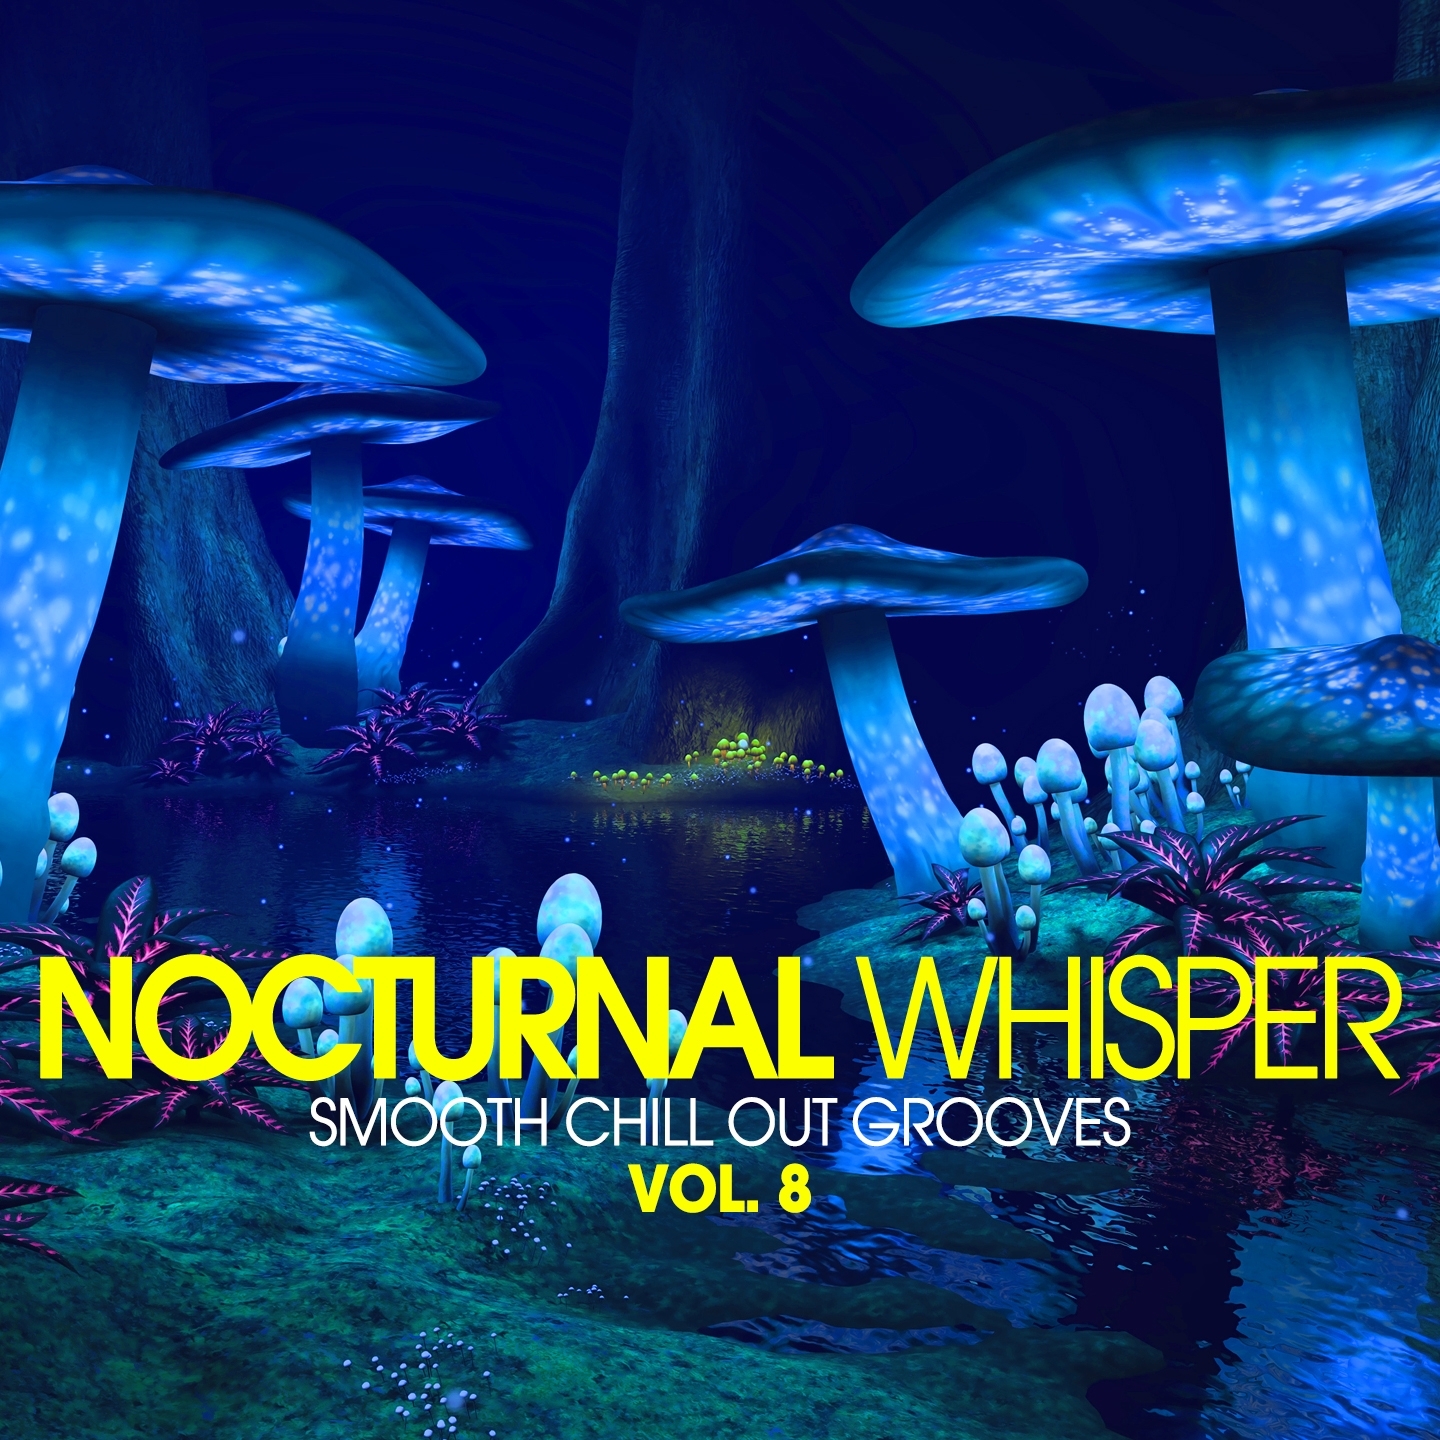 Nocturnal Whisper - Smooth Chill Out Grooves, Vol. 8